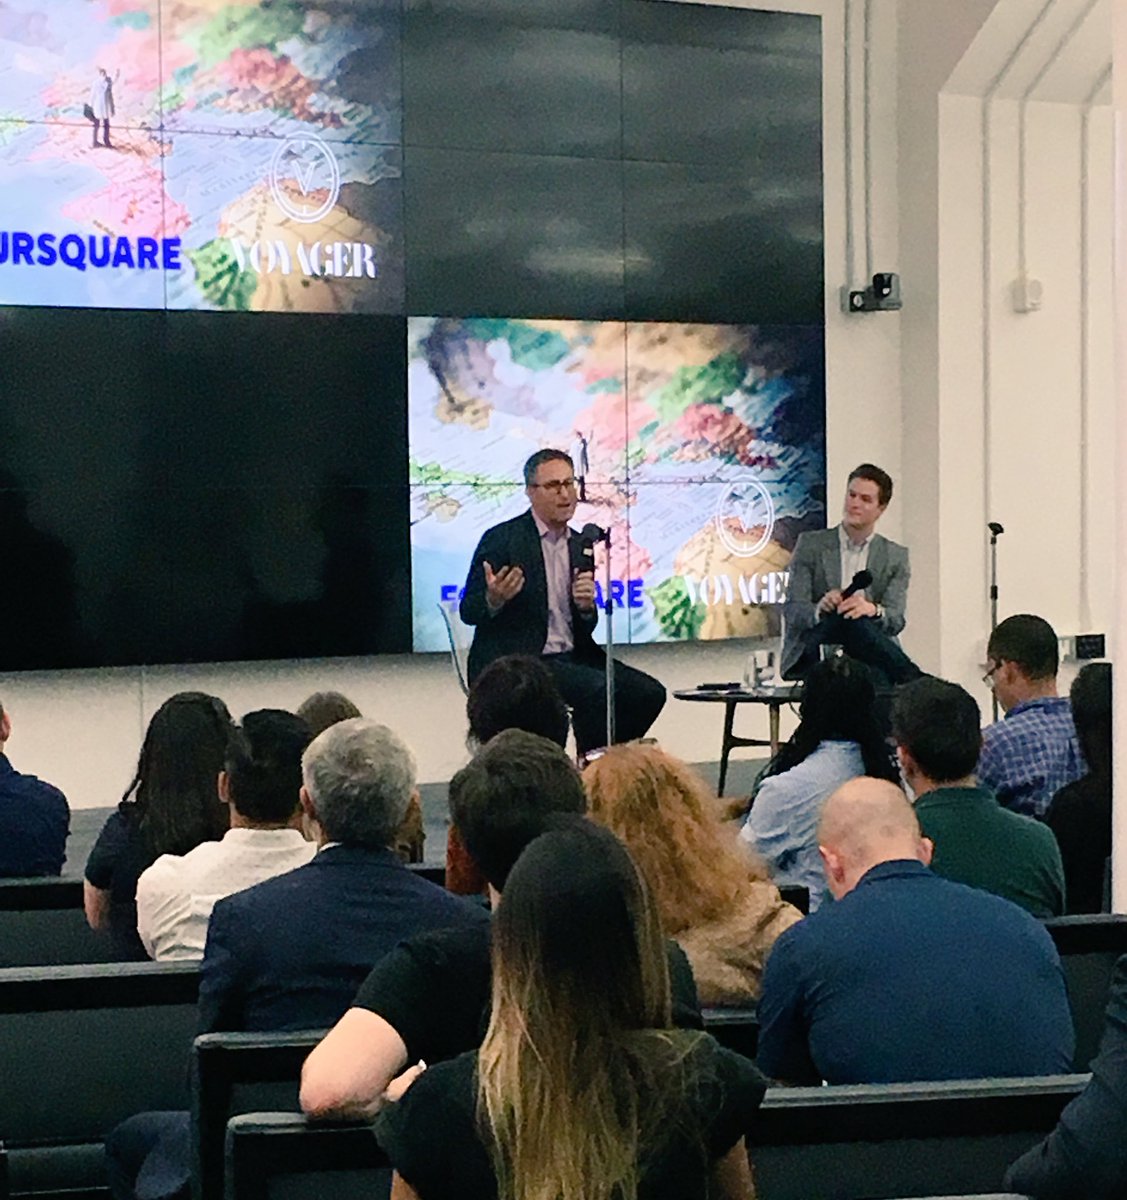 “I like to #travel, so I guess I’ll start a #travelstartup!” Great start to our Fireside Chat with @Foursquare CEO @JeffGlueck!